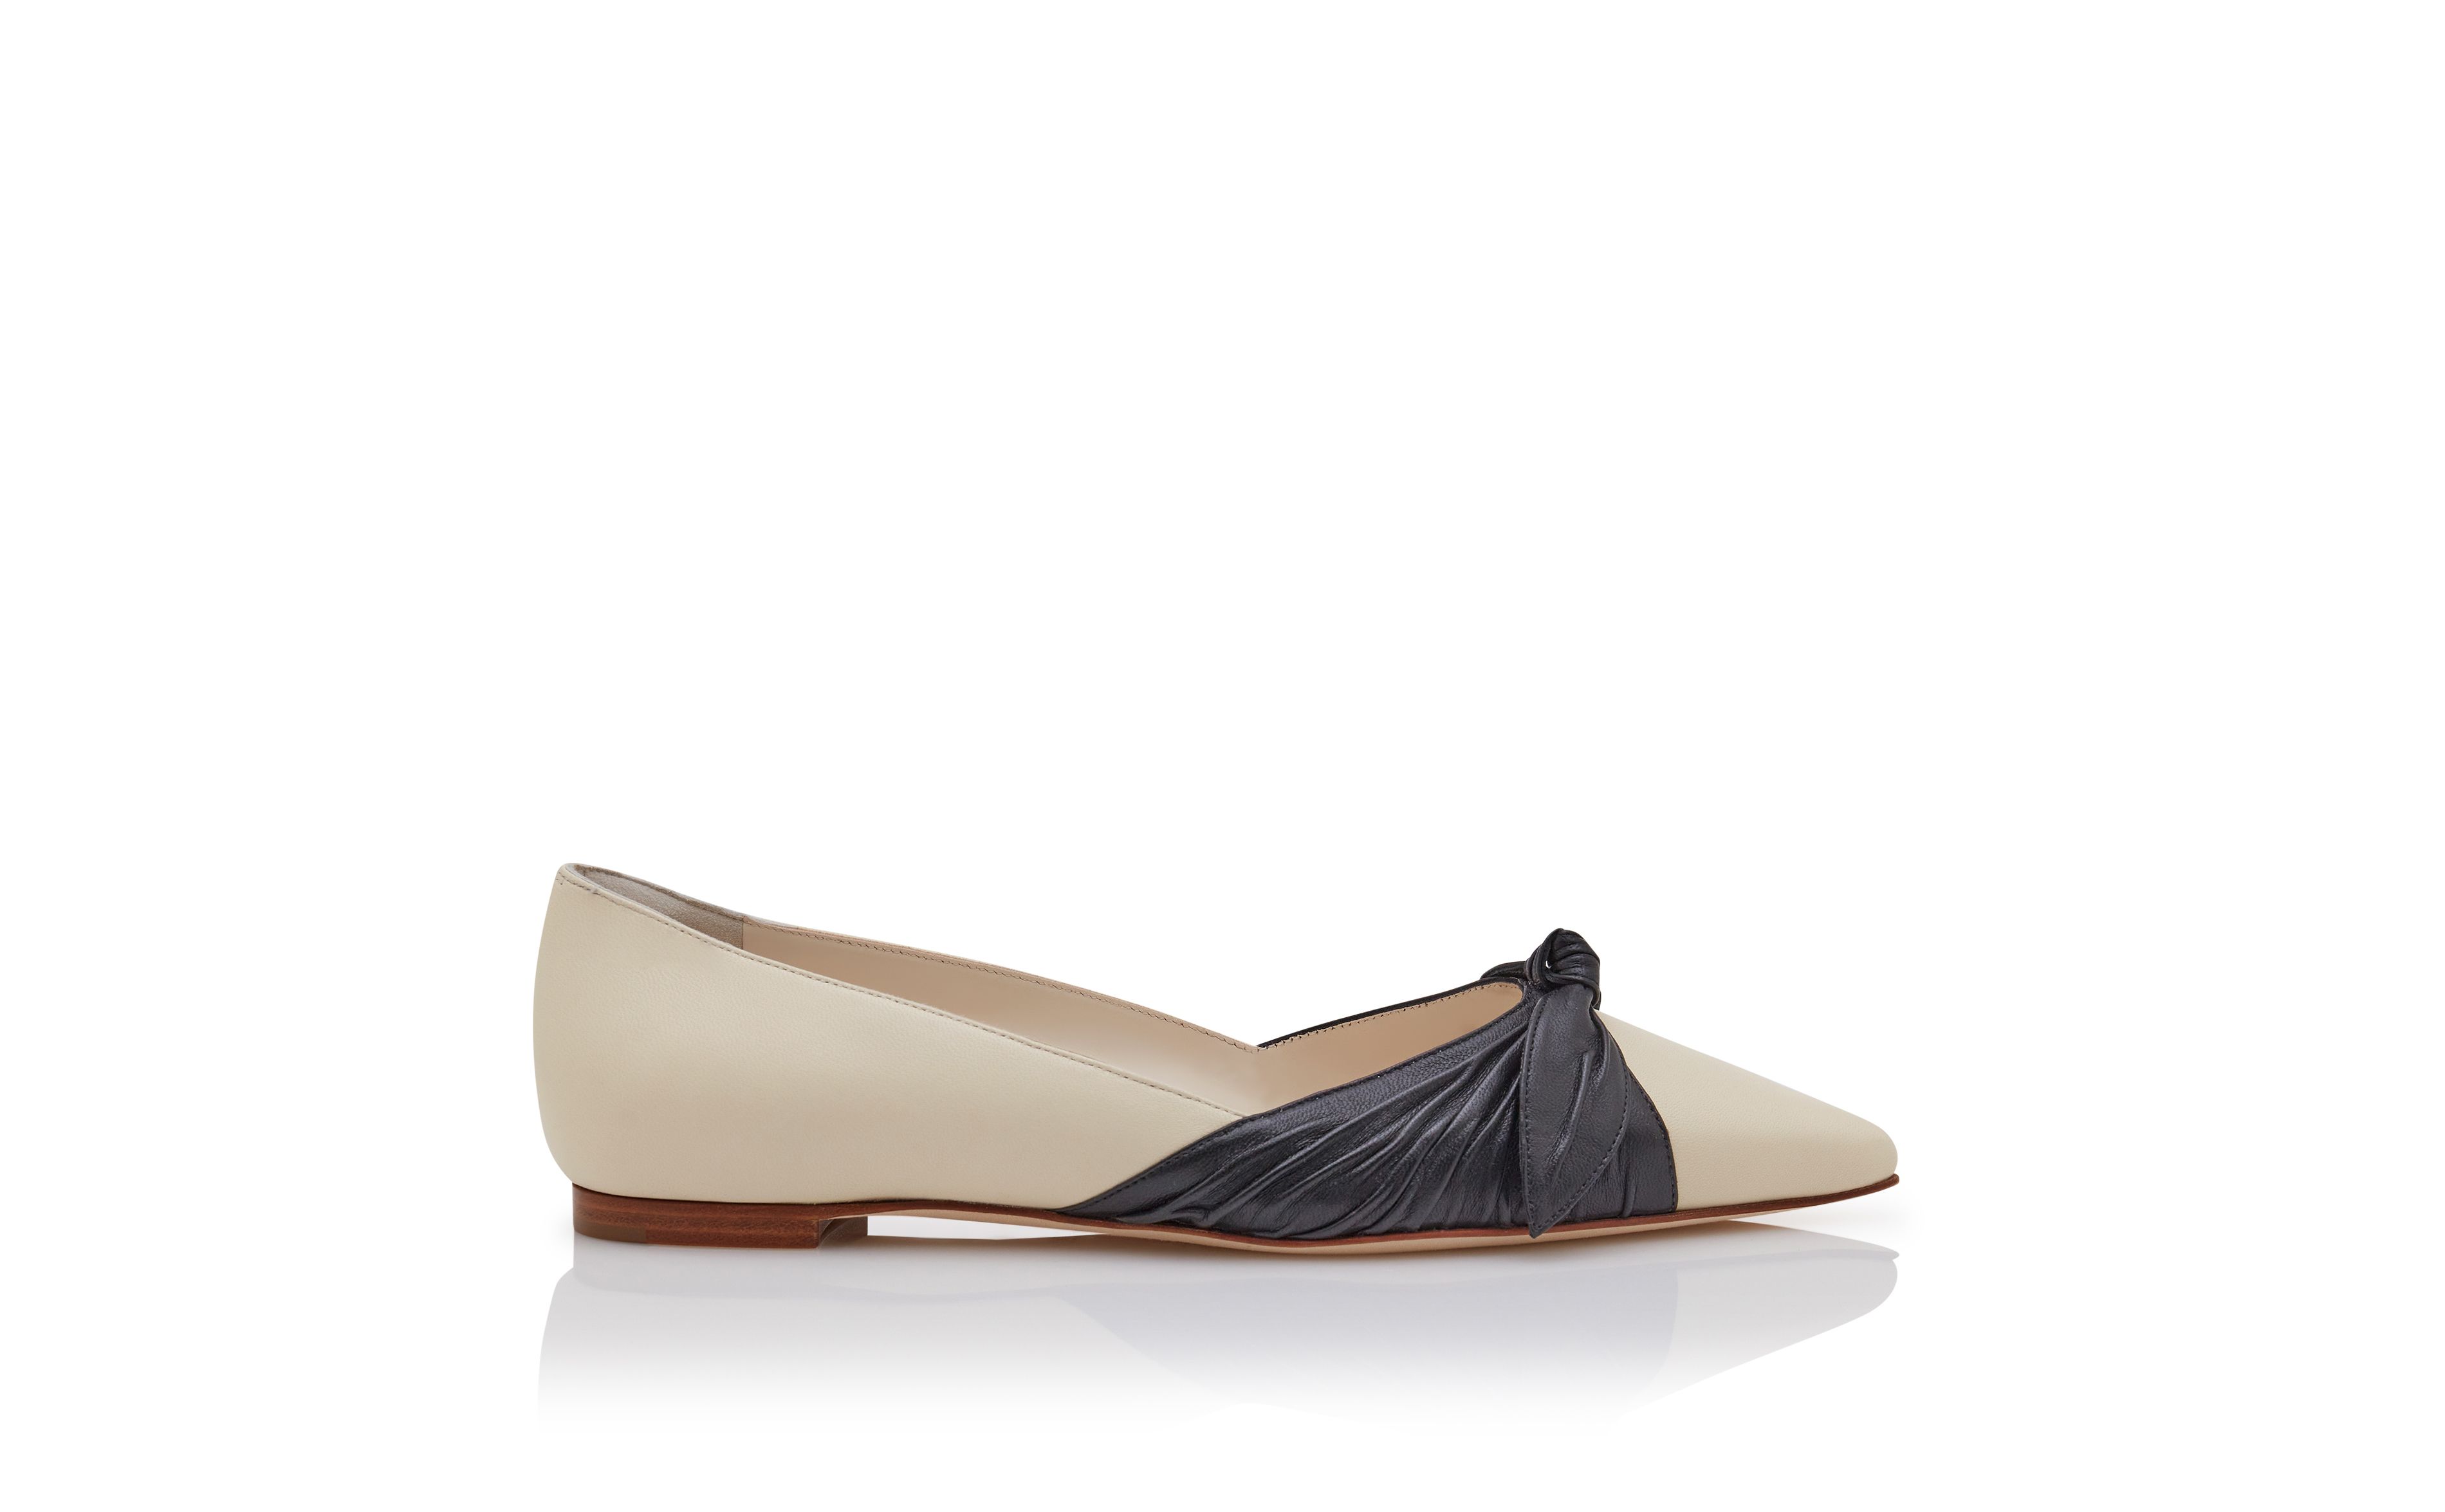 Designer Cream and Black Nappa Leather Flat Pumps - Image Side View